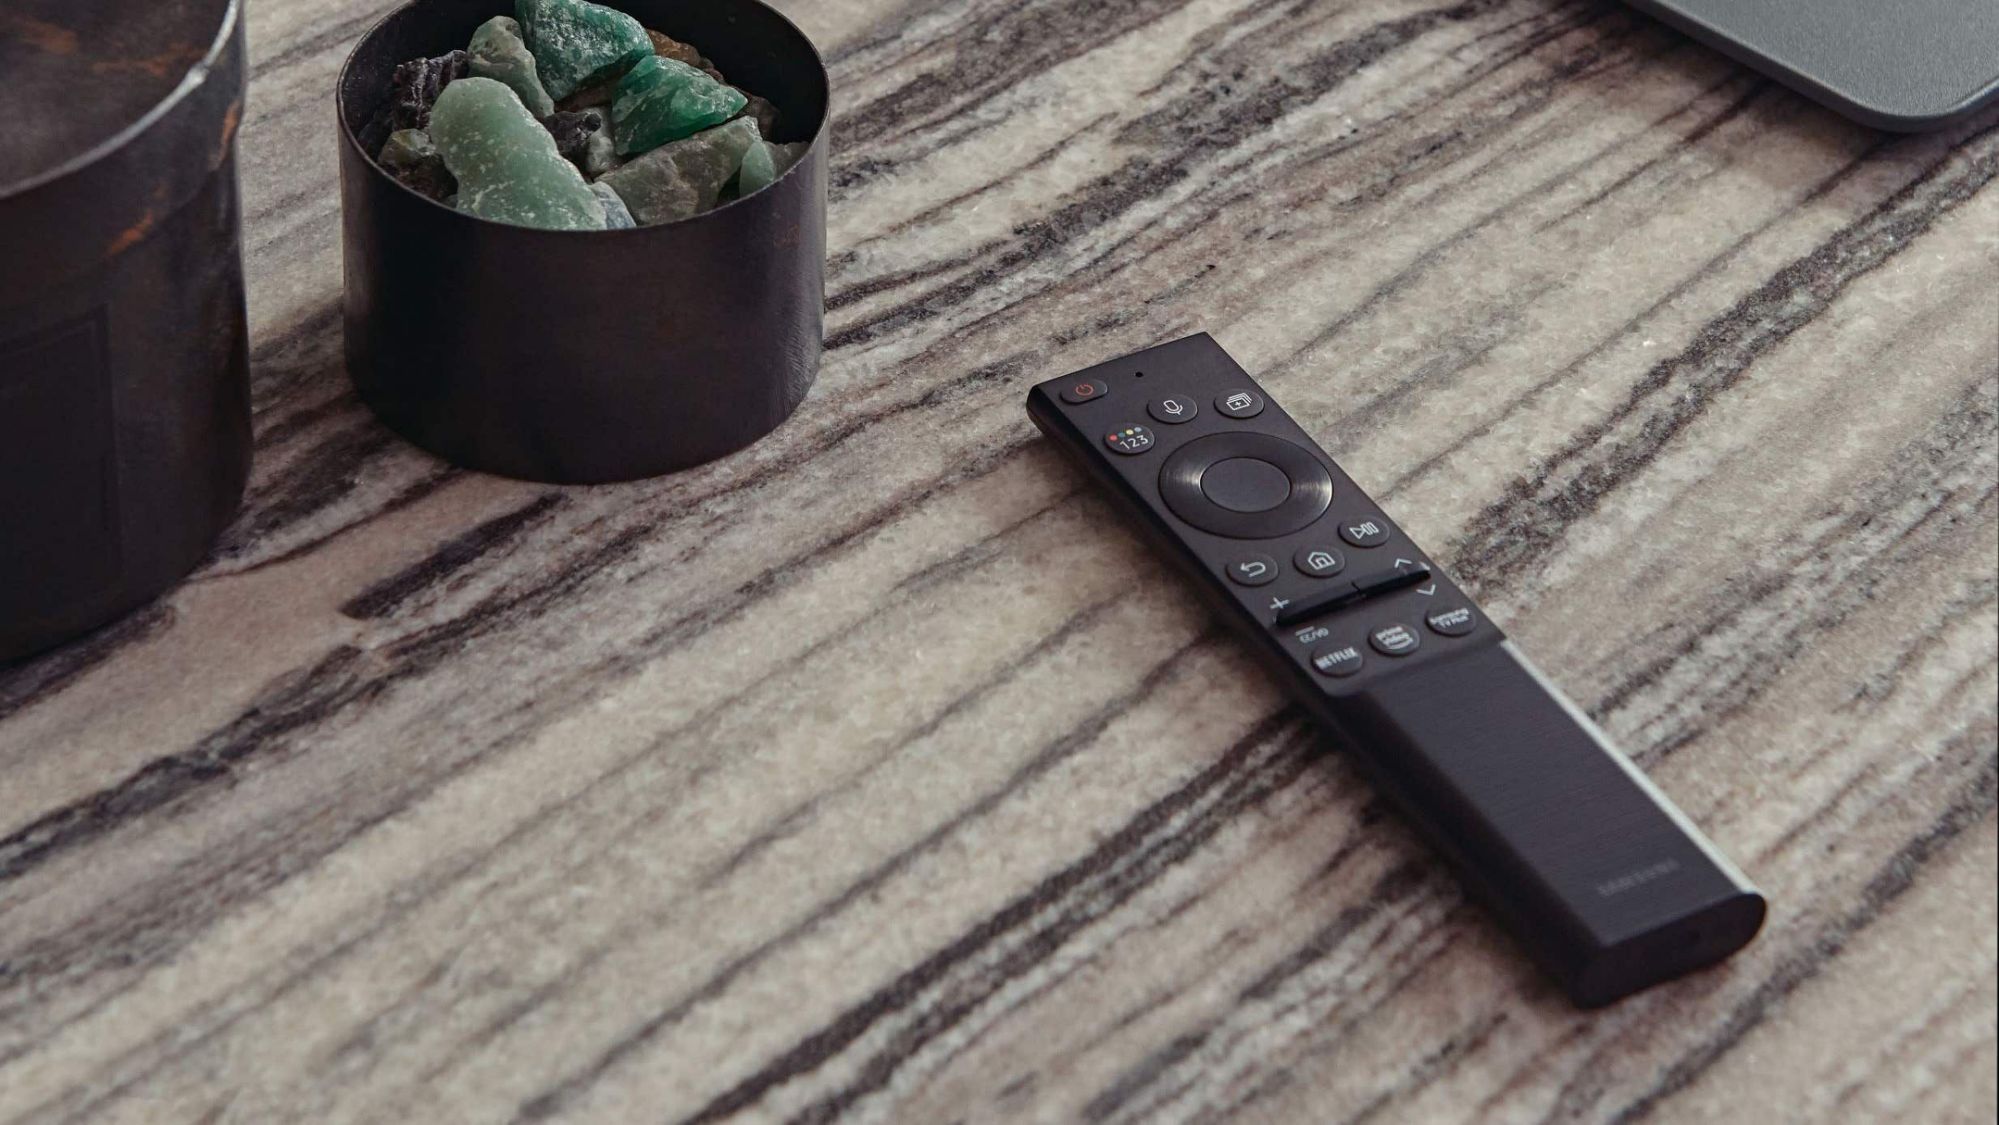 Samsung produced a solar charging Eco Remote for its most recent TVs